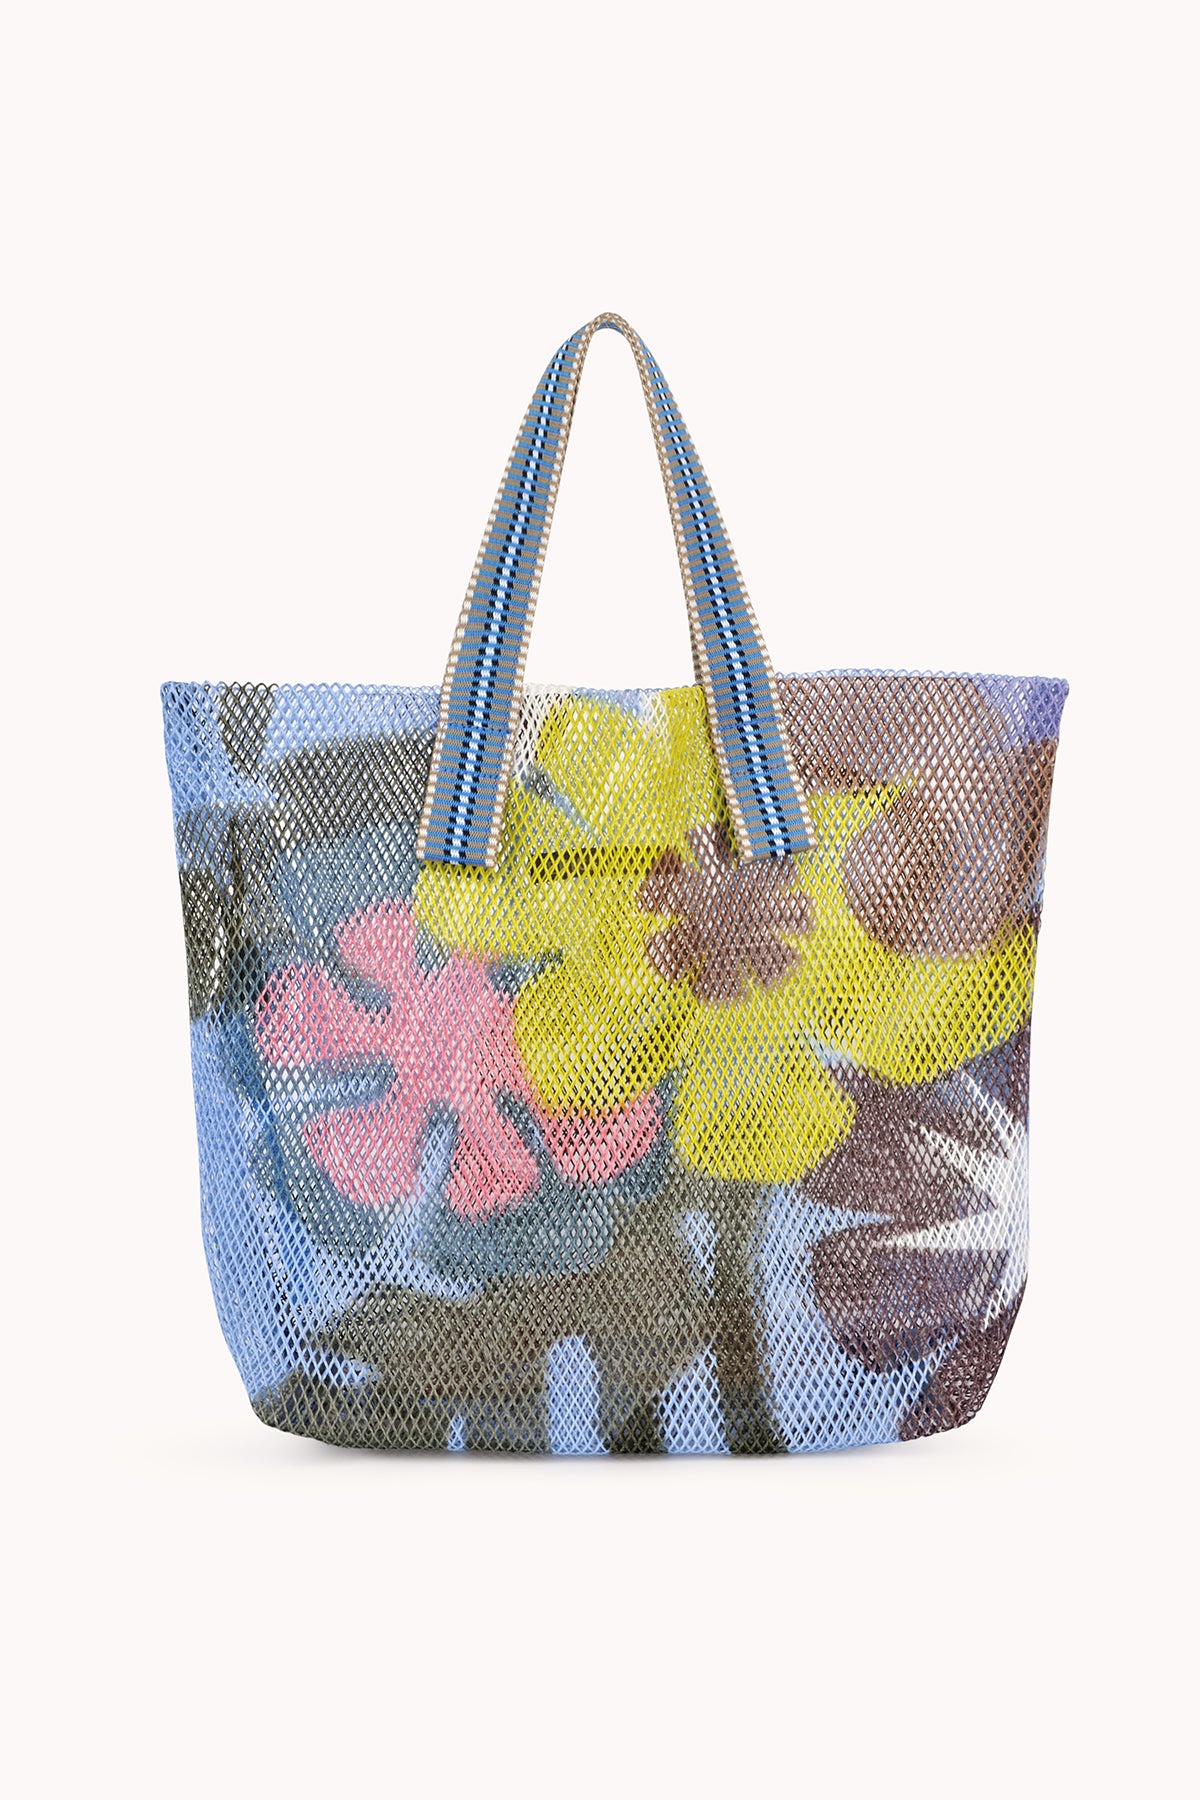 Small mesh tote in blue with multi colored flowers.-24508064268481